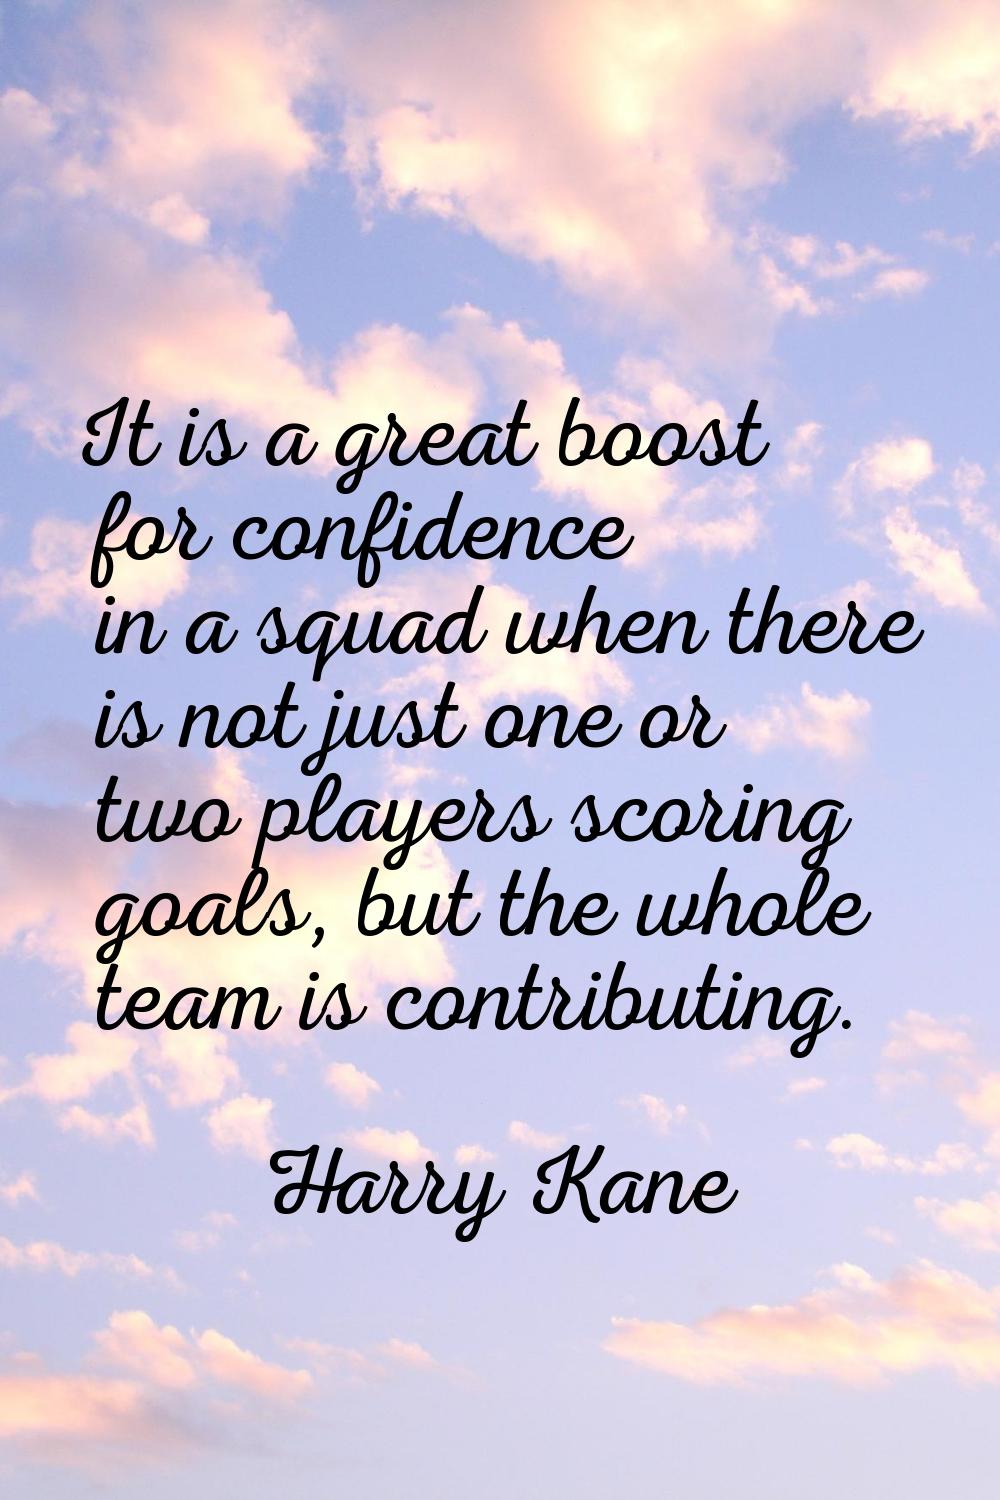 It is a great boost for confidence in a squad when there is not just one or two players scoring goa